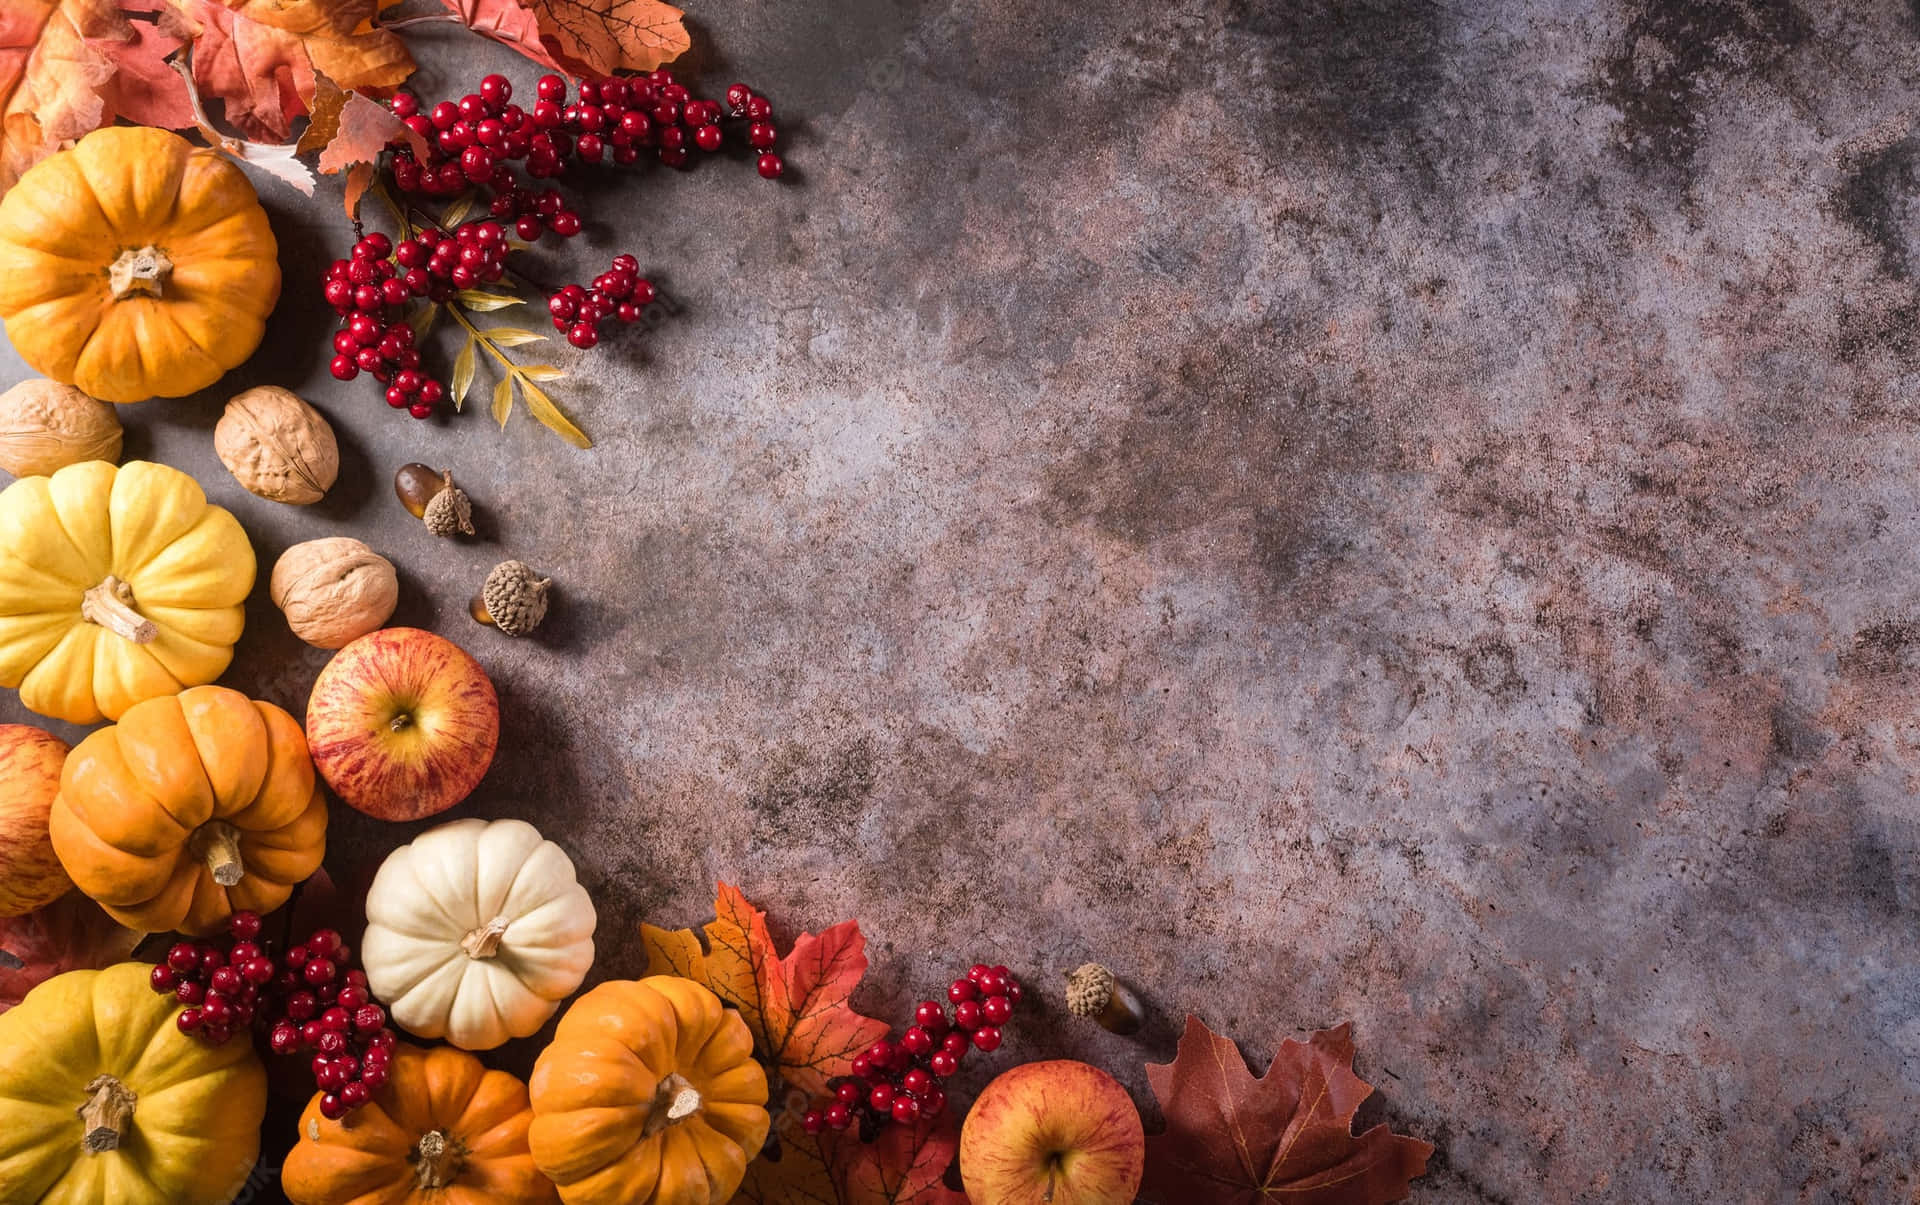 Celebrate The Season Of Thanks With A Festive Fall Thanksgiving! Wallpaper